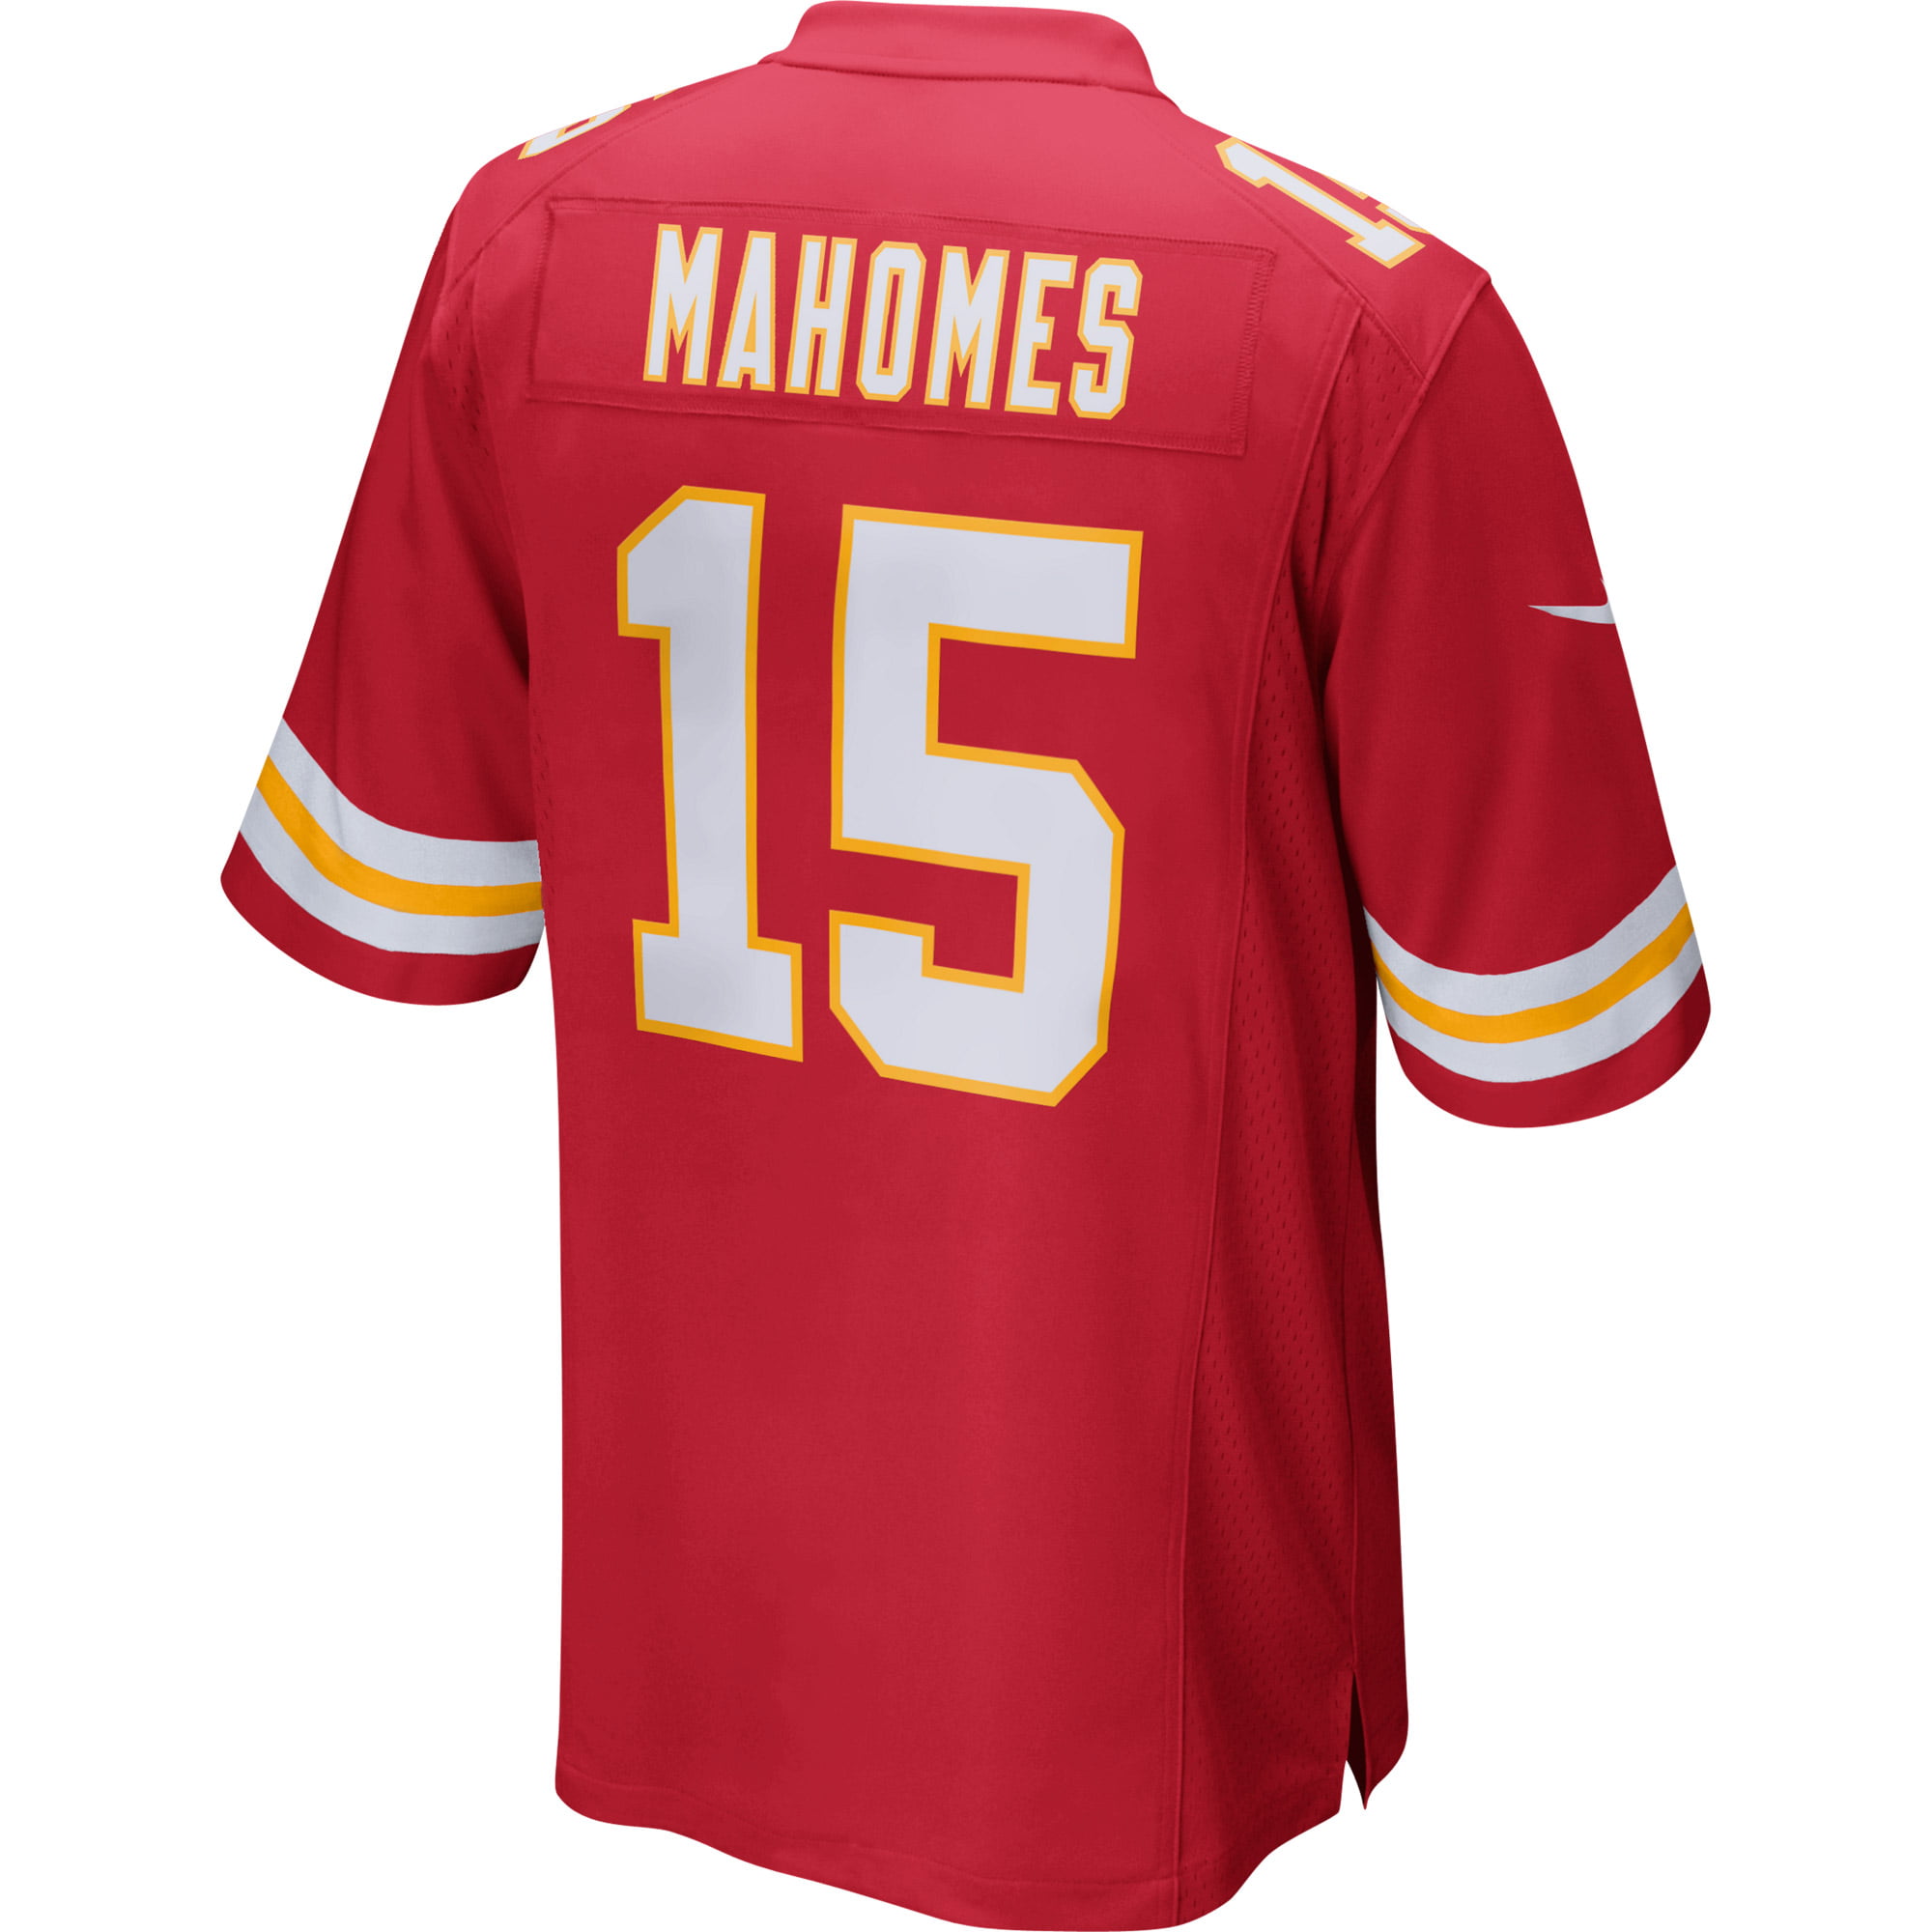 Outerstuff Youth #15 Kansas City Chiefs Patrick Mahomes Player Jersey Red 